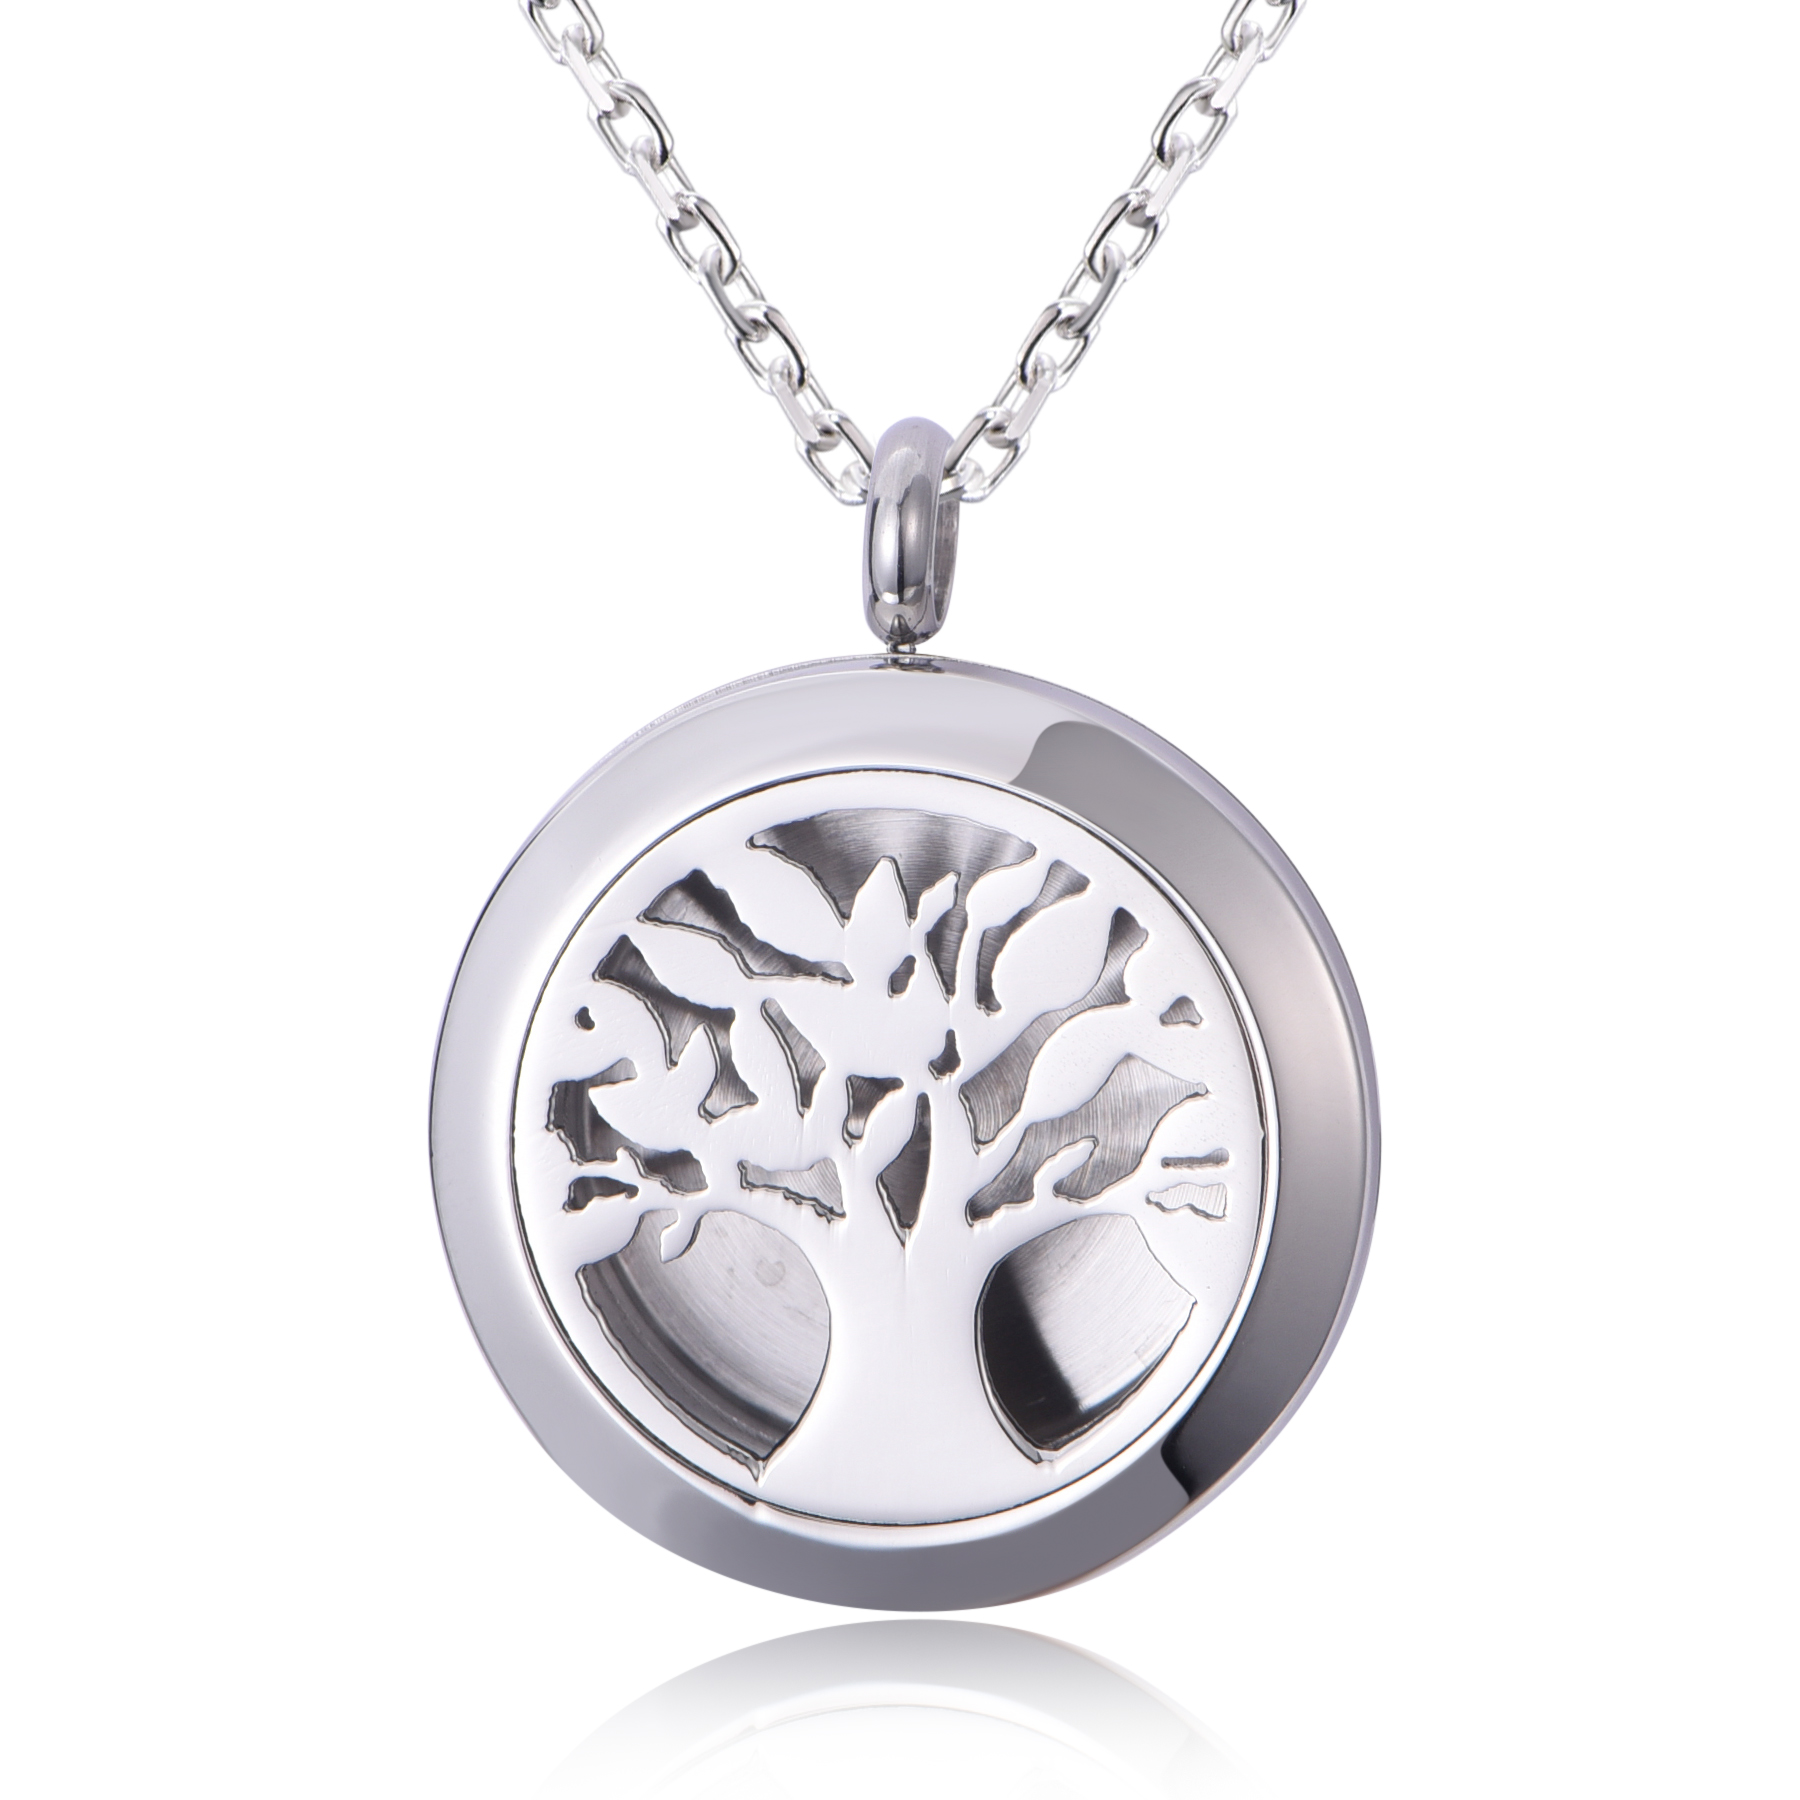 High Quality Stainless Steel Charm Tree of Life Locket Perfume Diffuse Pendant Necklace NH9-15